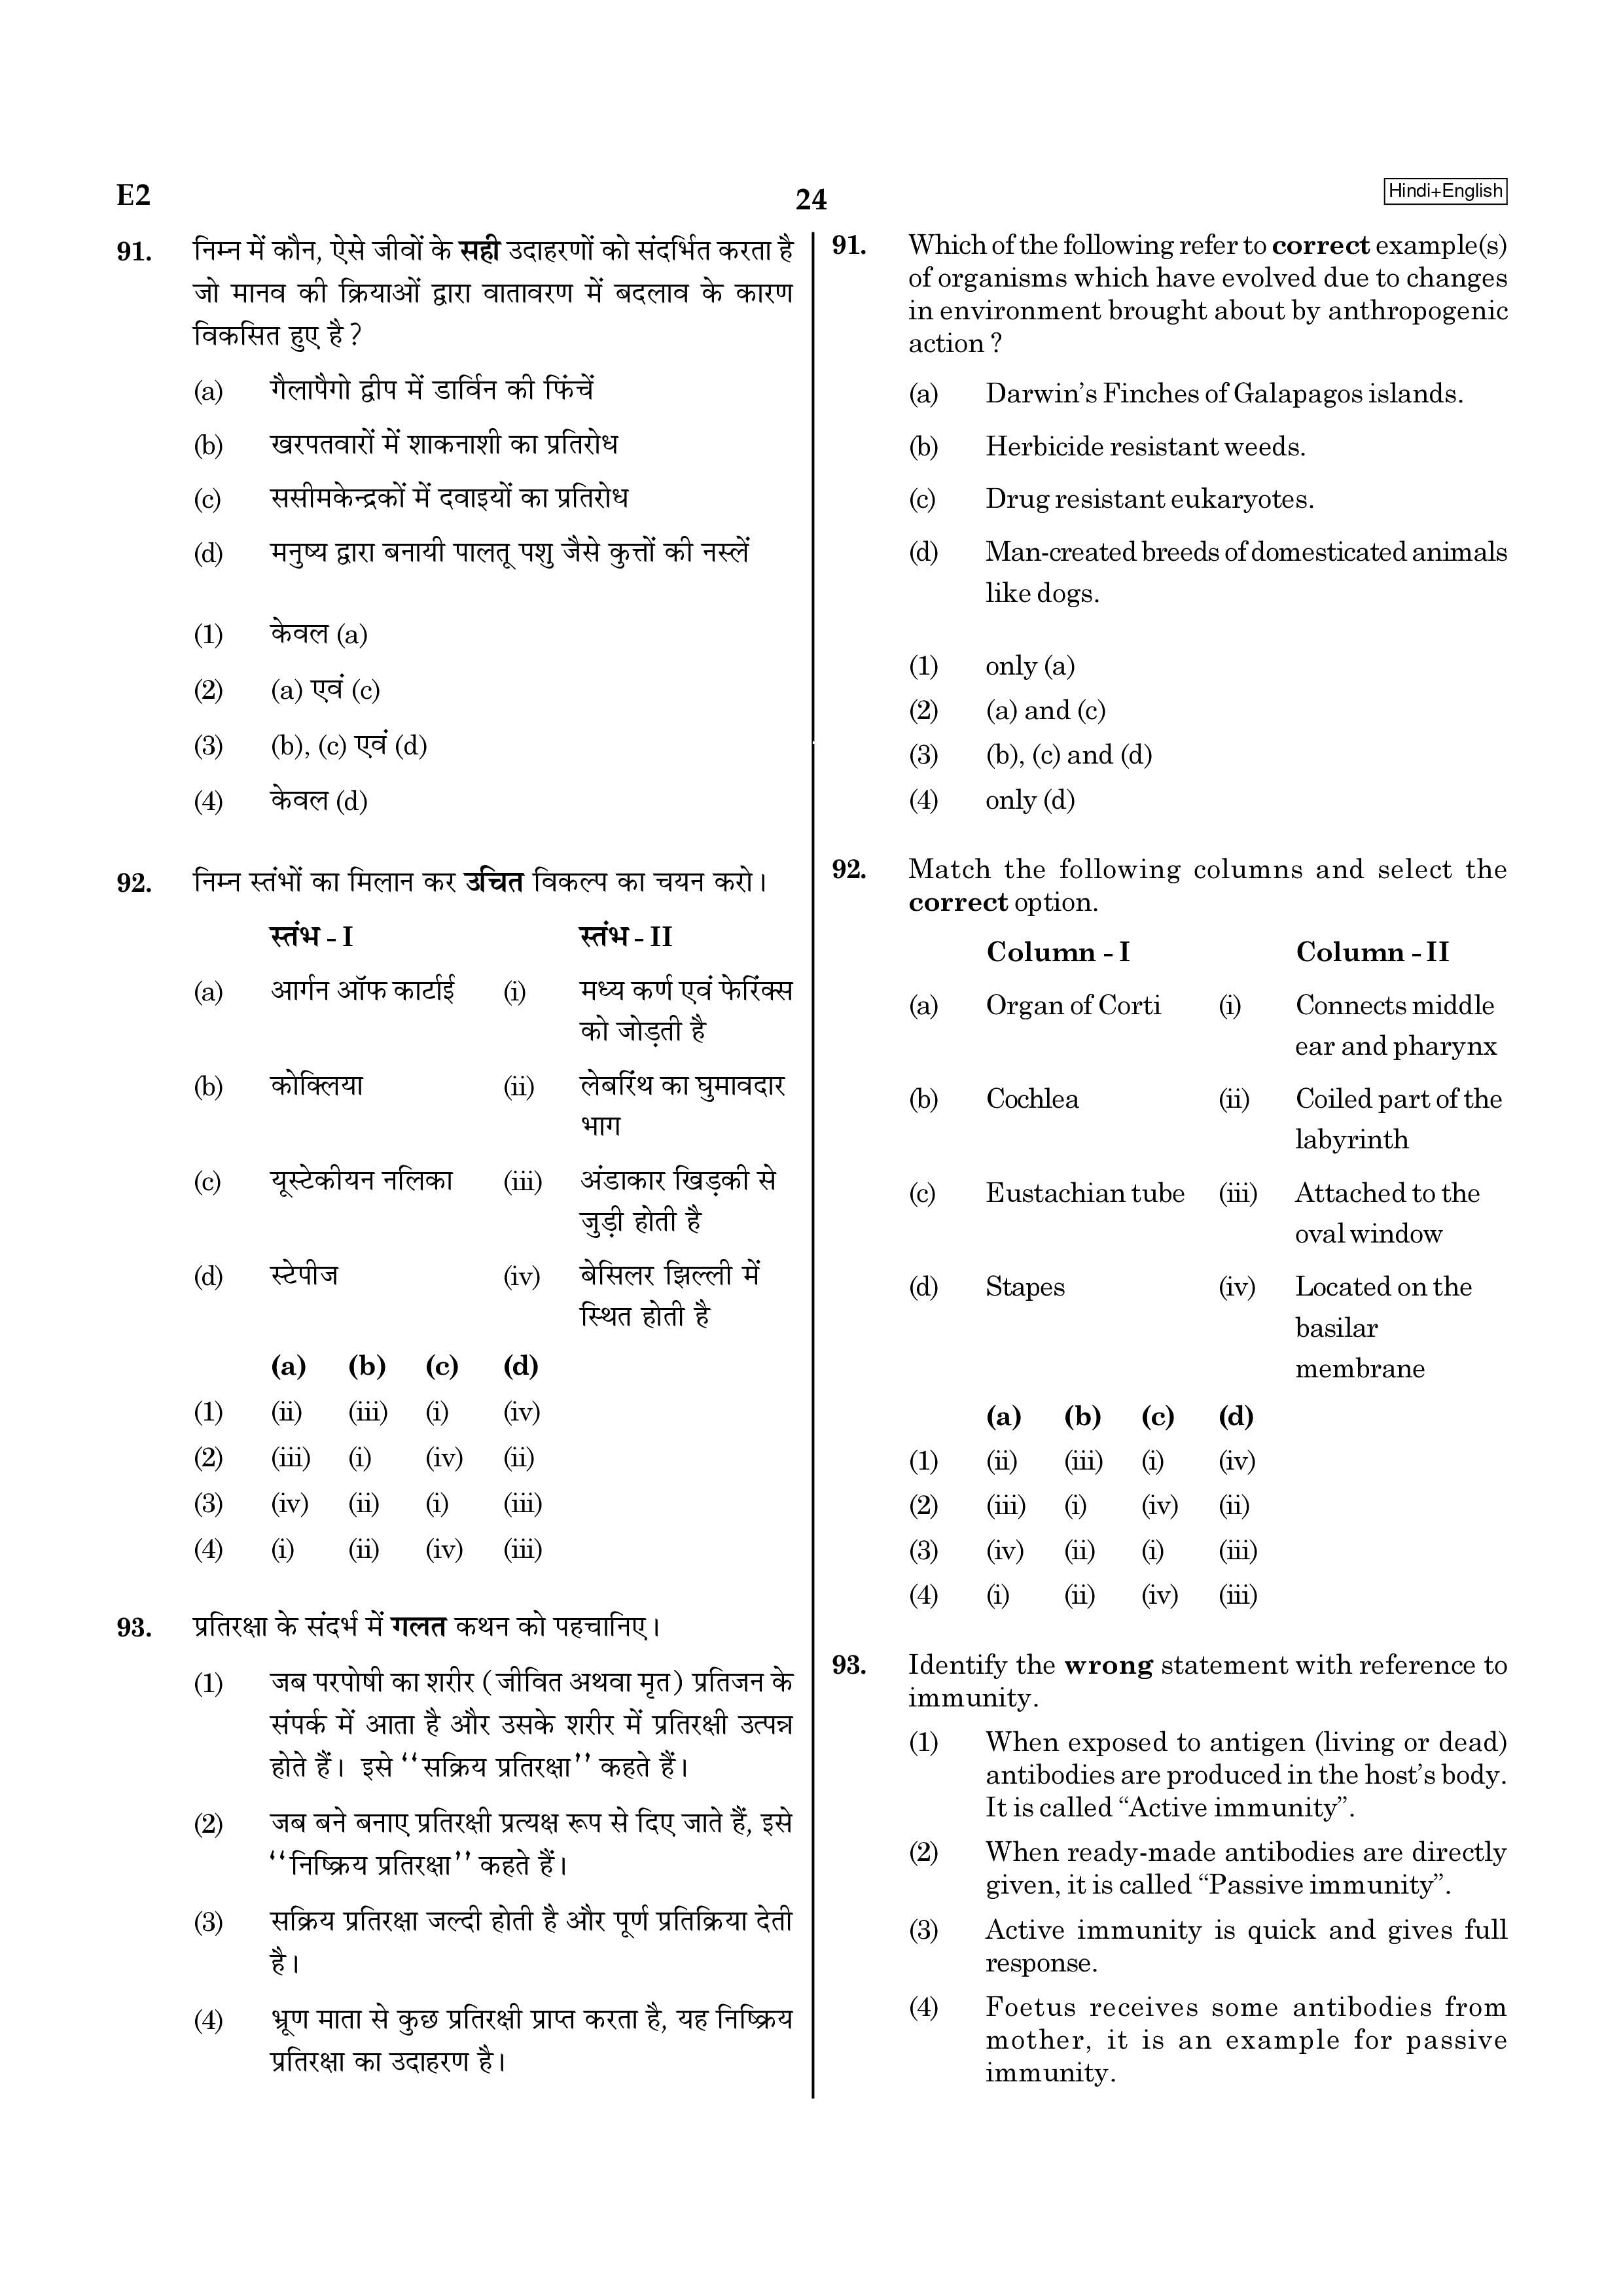 NEET 2020 Question Paper with Answer Key PDF in Hindi for E2 to H2 ...